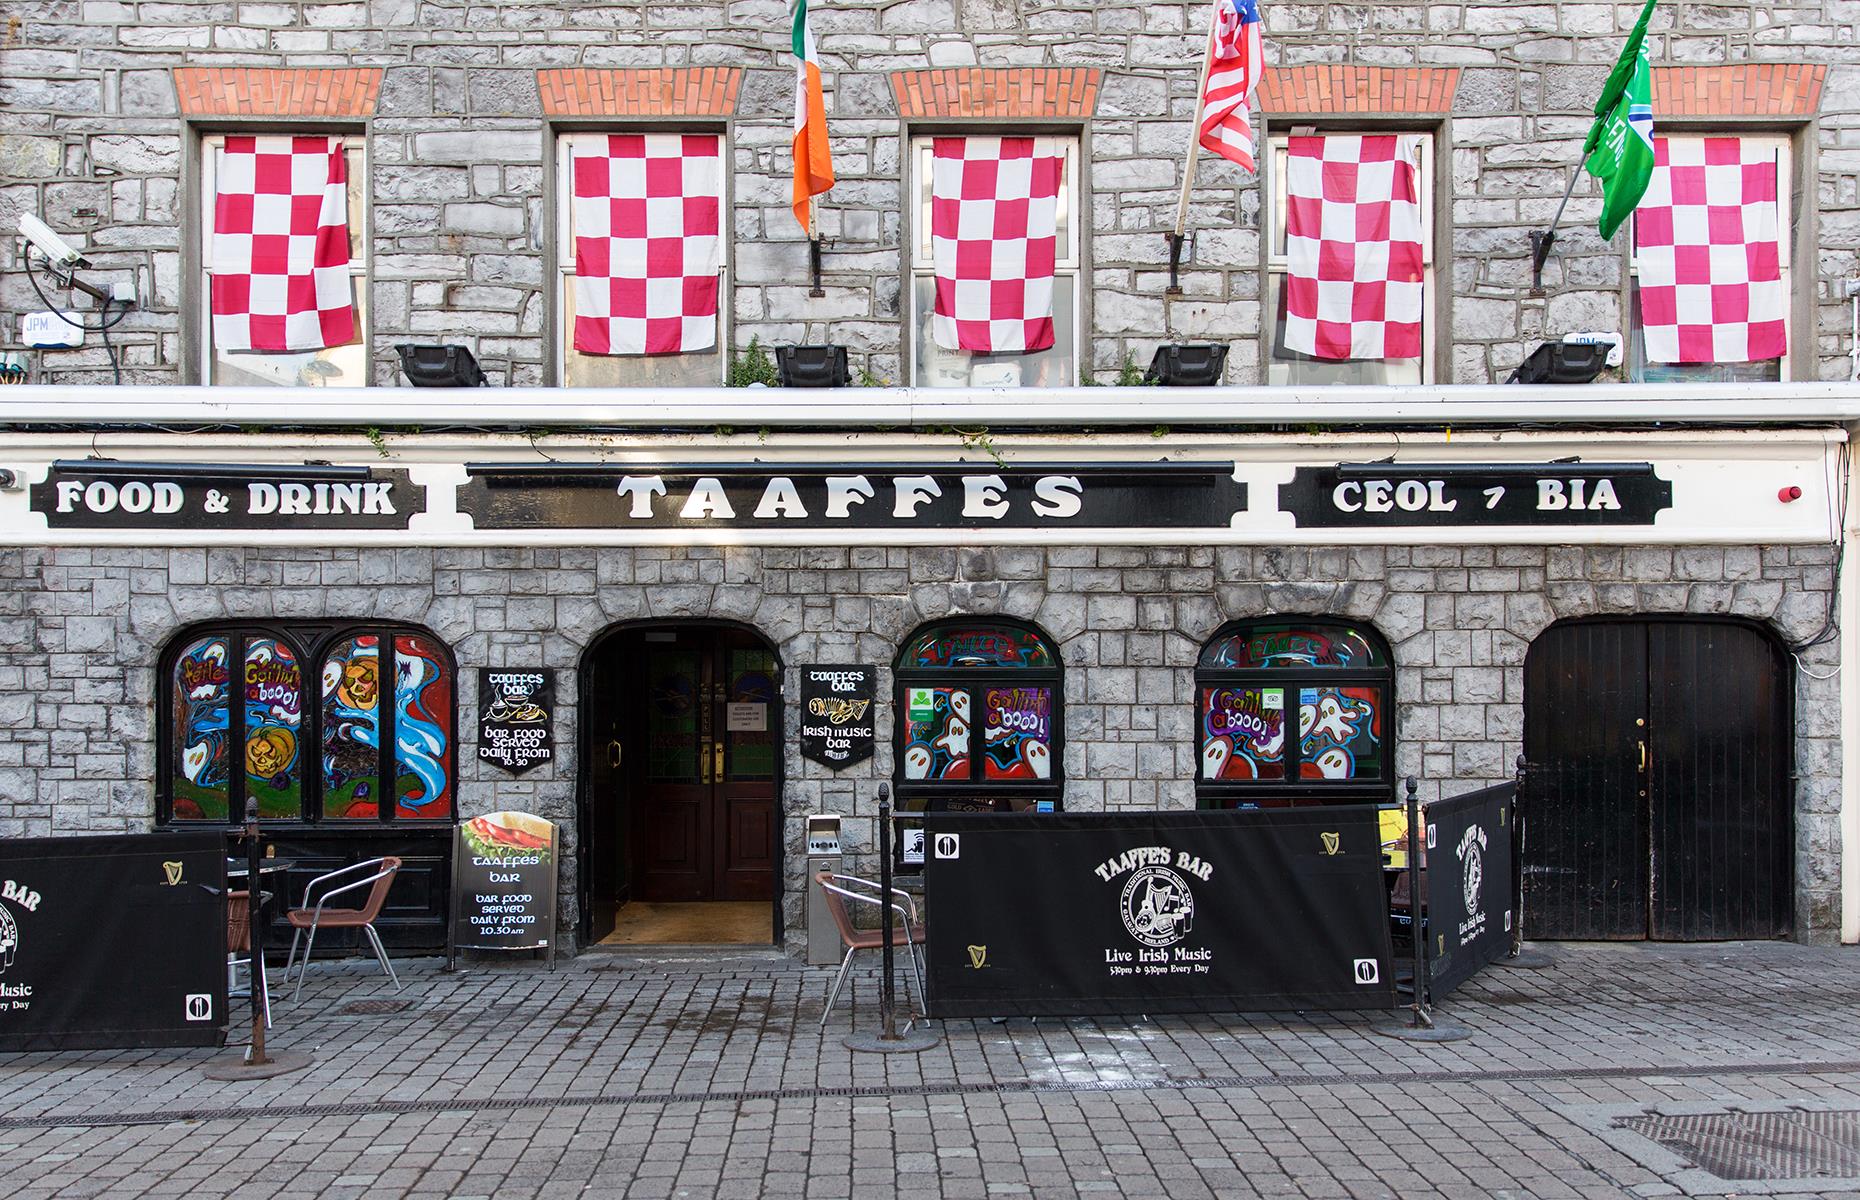 You don’t have to go far to find traditional Irish music in Galway’s pubs. This lively city tucked into Ireland’s west coast has plenty of places for a musical night out. Taaffes Bar is one of the most popular, with two sessions of traditional music each evening. Order a pint of Guinness and listen to the sounds of fiddles, tin whistles, and bodhran drums.